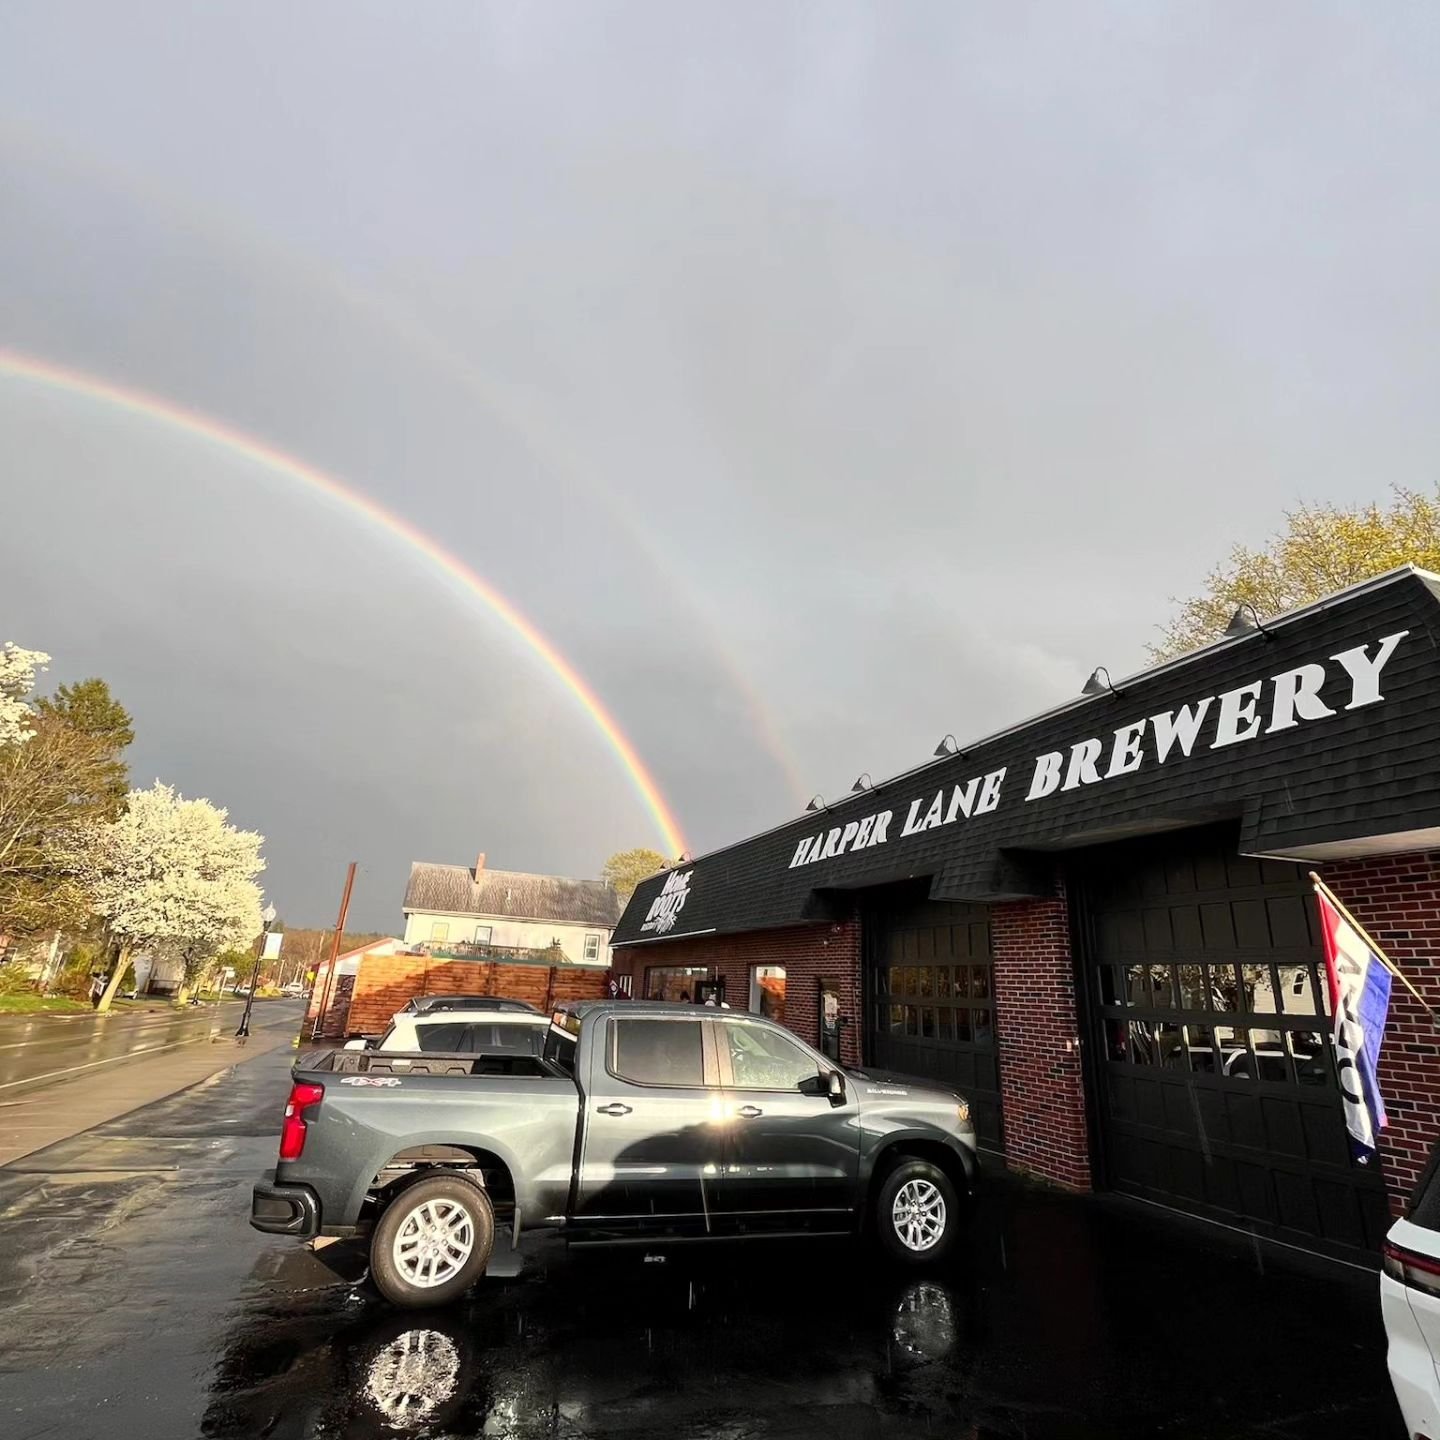 Come on by for a pint of gold! 😄🍻

Photo credit- @ashleymalt 

#rainbow #brewery #middleborough #pints #beer